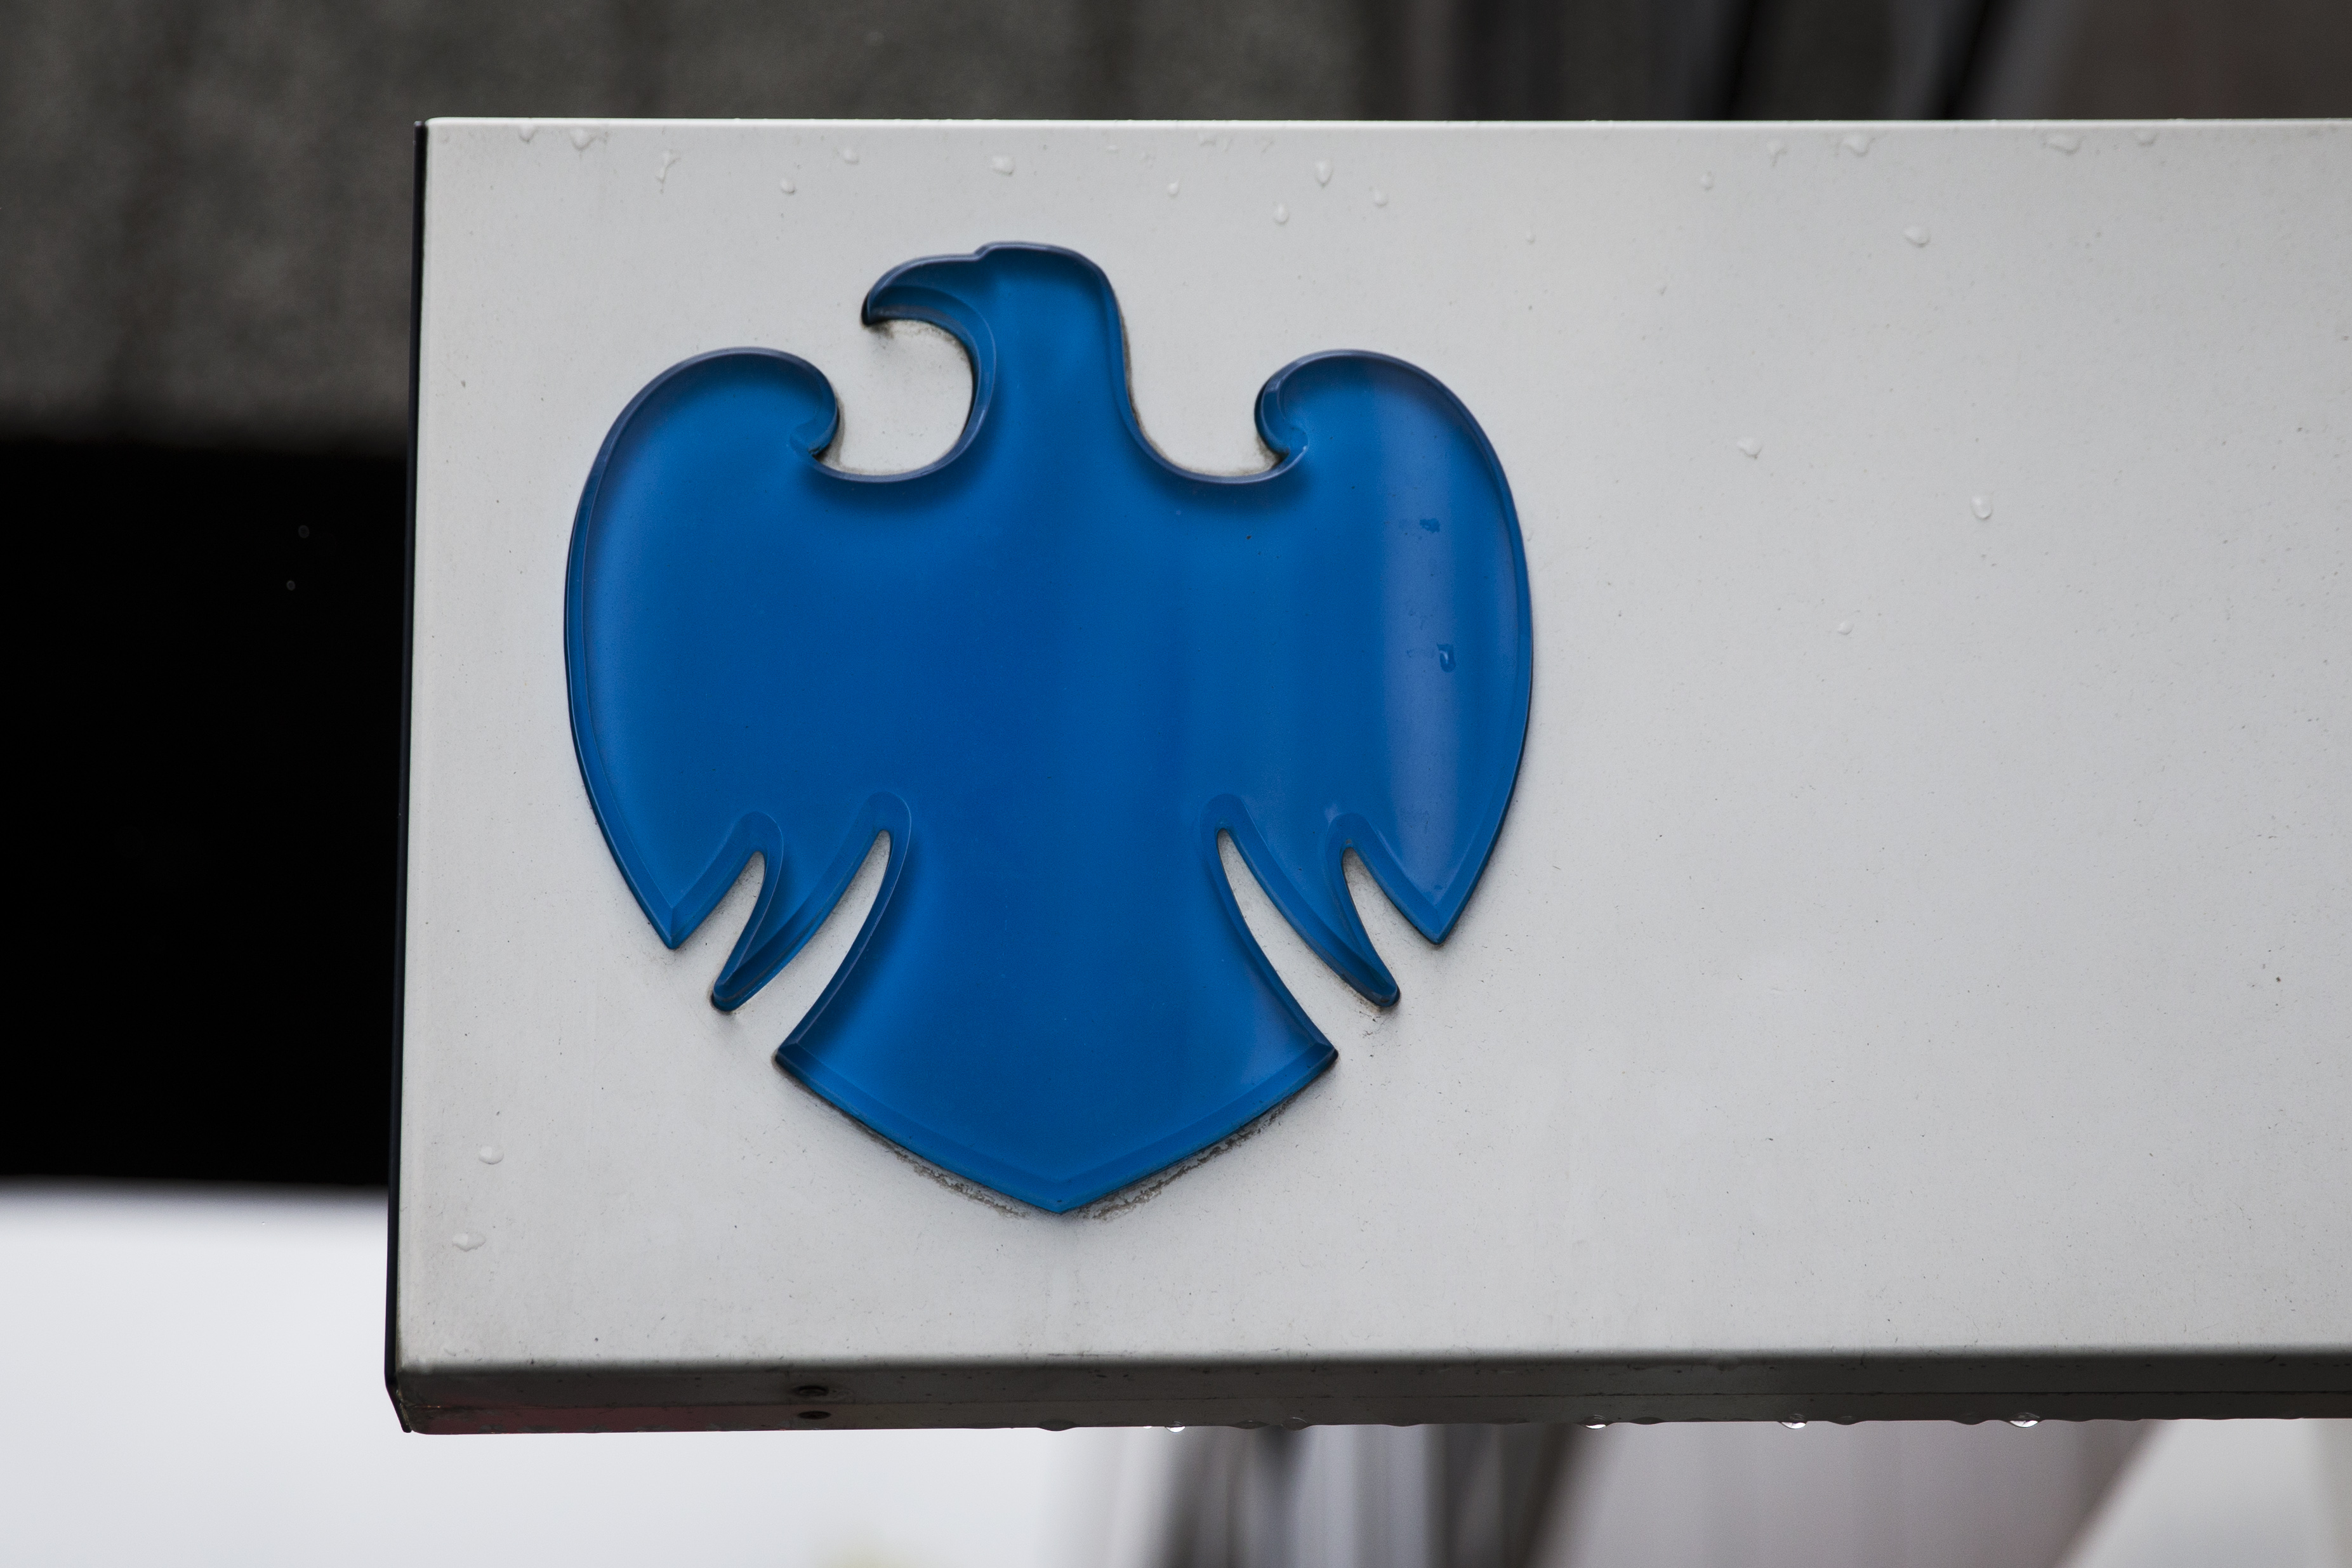 The Barclays logo is seen outside one of its branches in London. The bank said deregulation in China could spark a rally in Chinese banks. Photo: AP